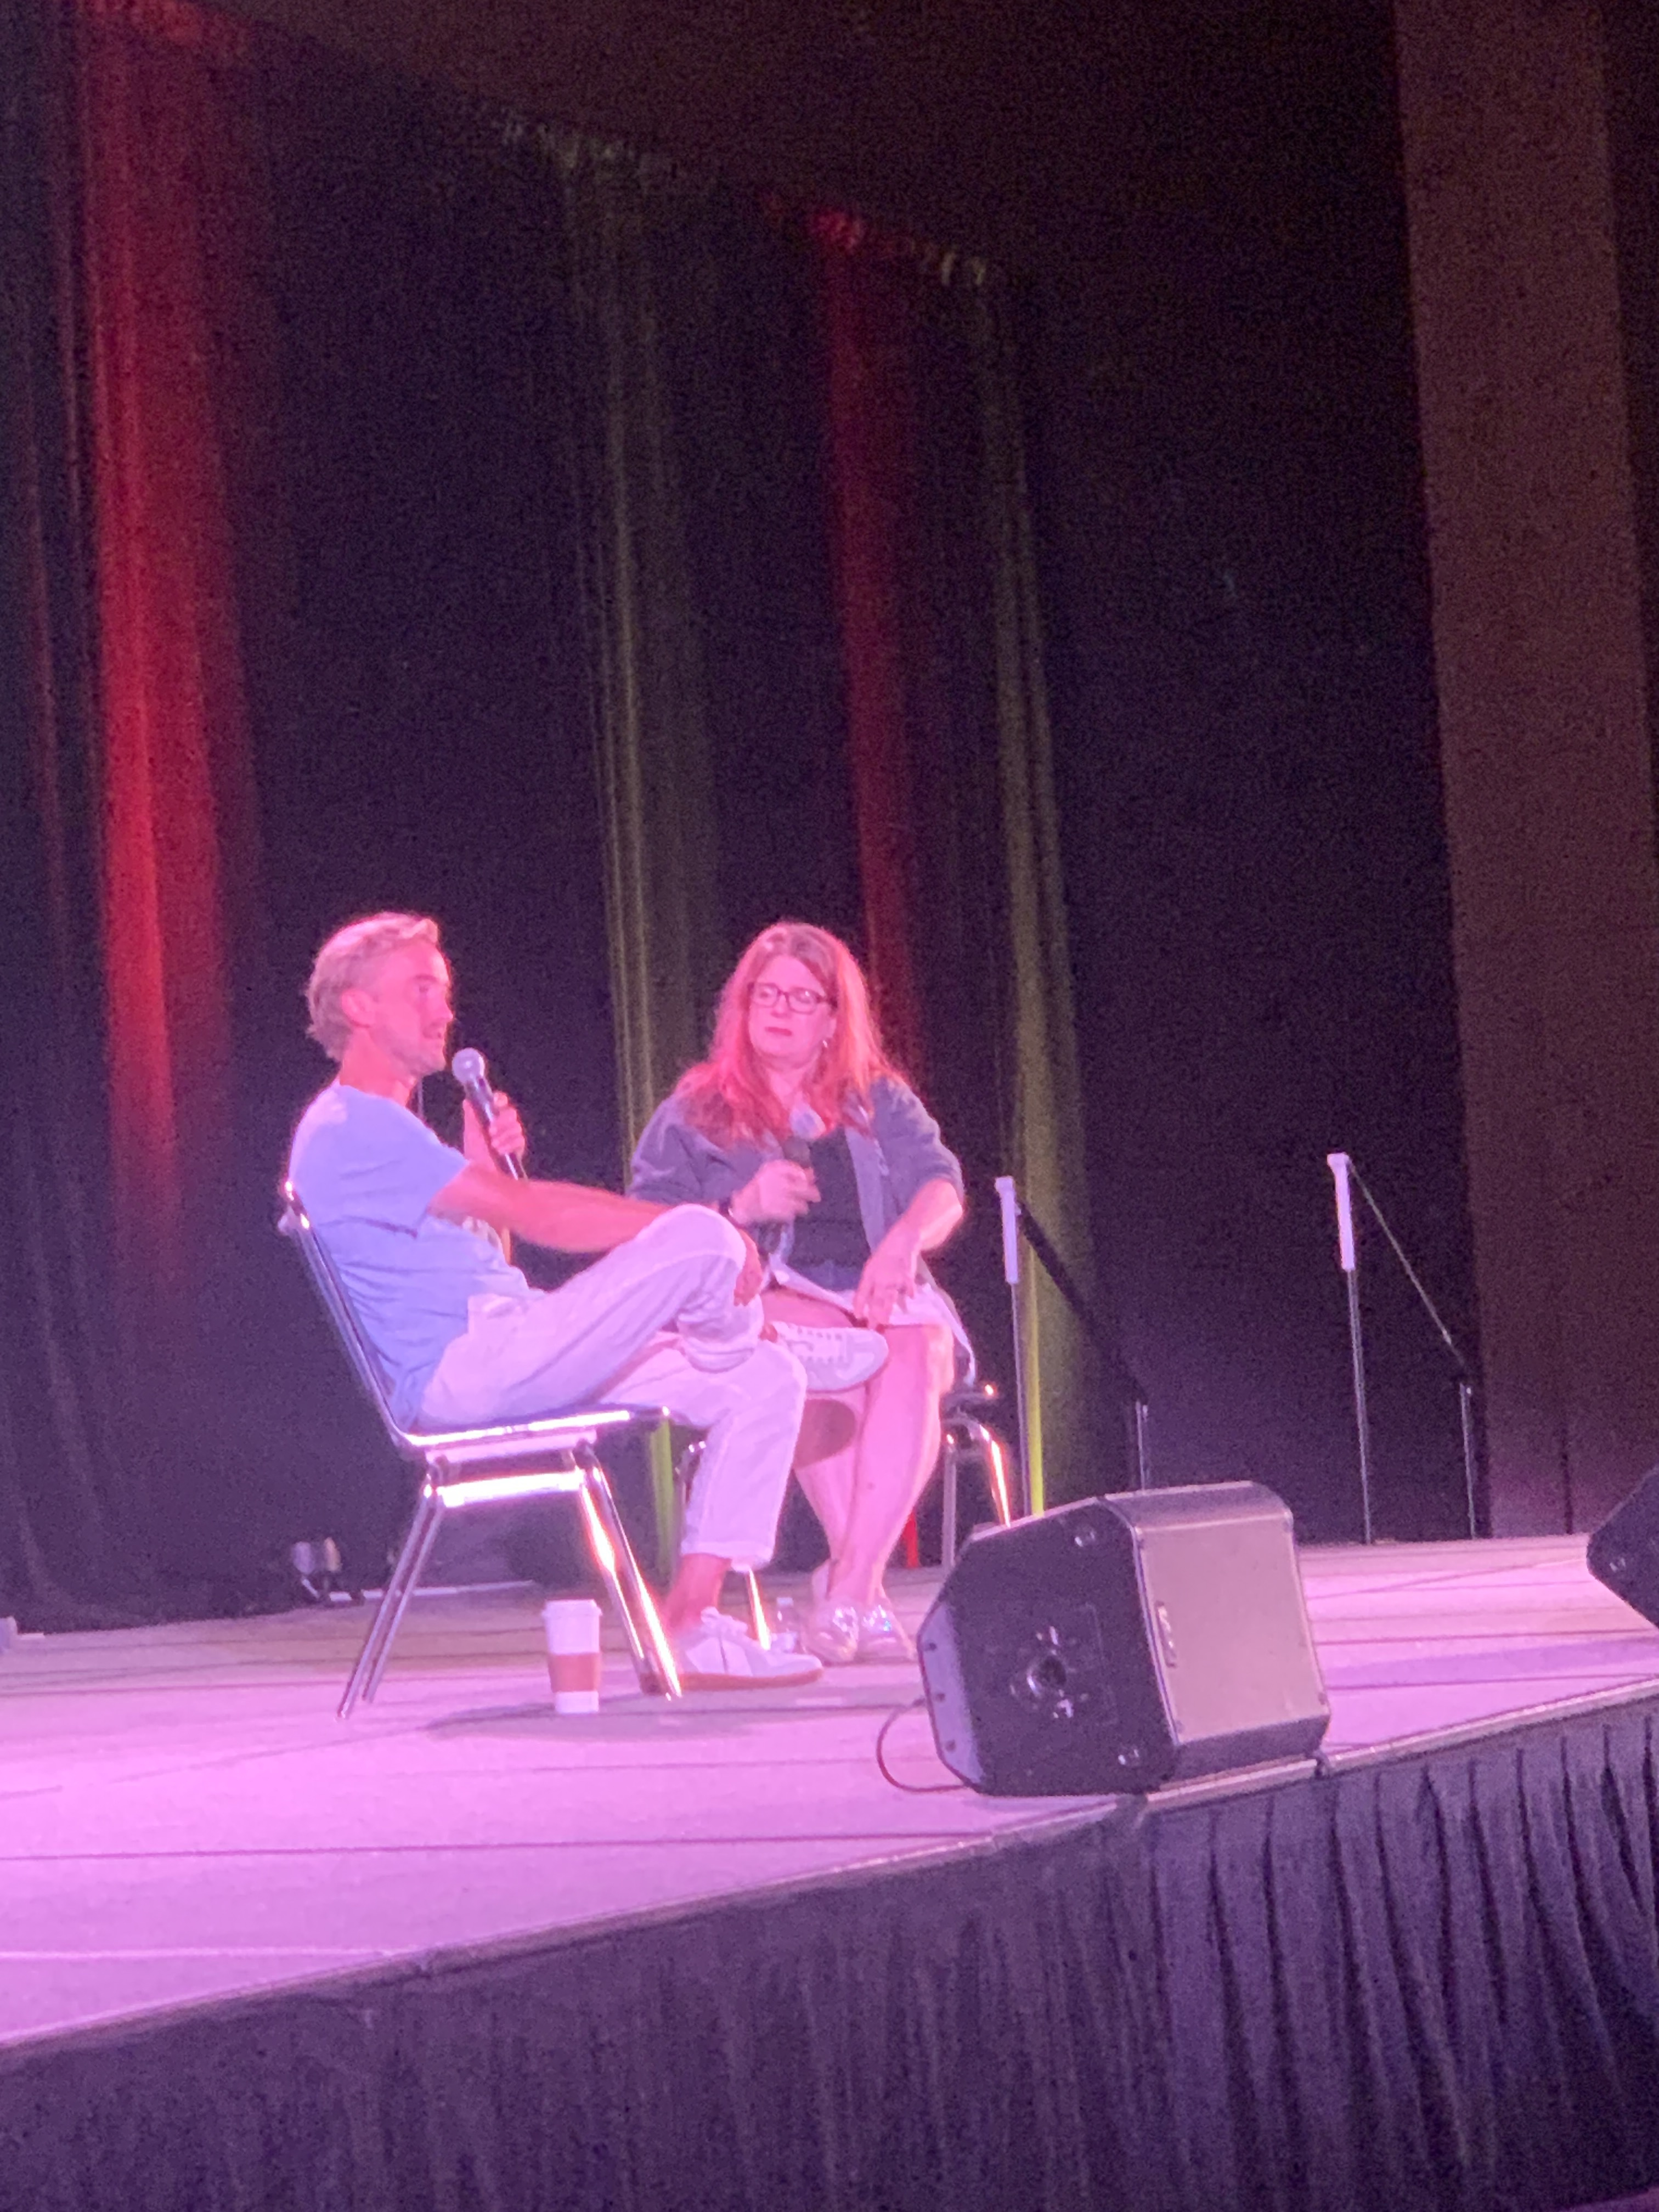 Tom Felton being interviewed on stage by Melissa Anelli, a pinkish light tints the photo.